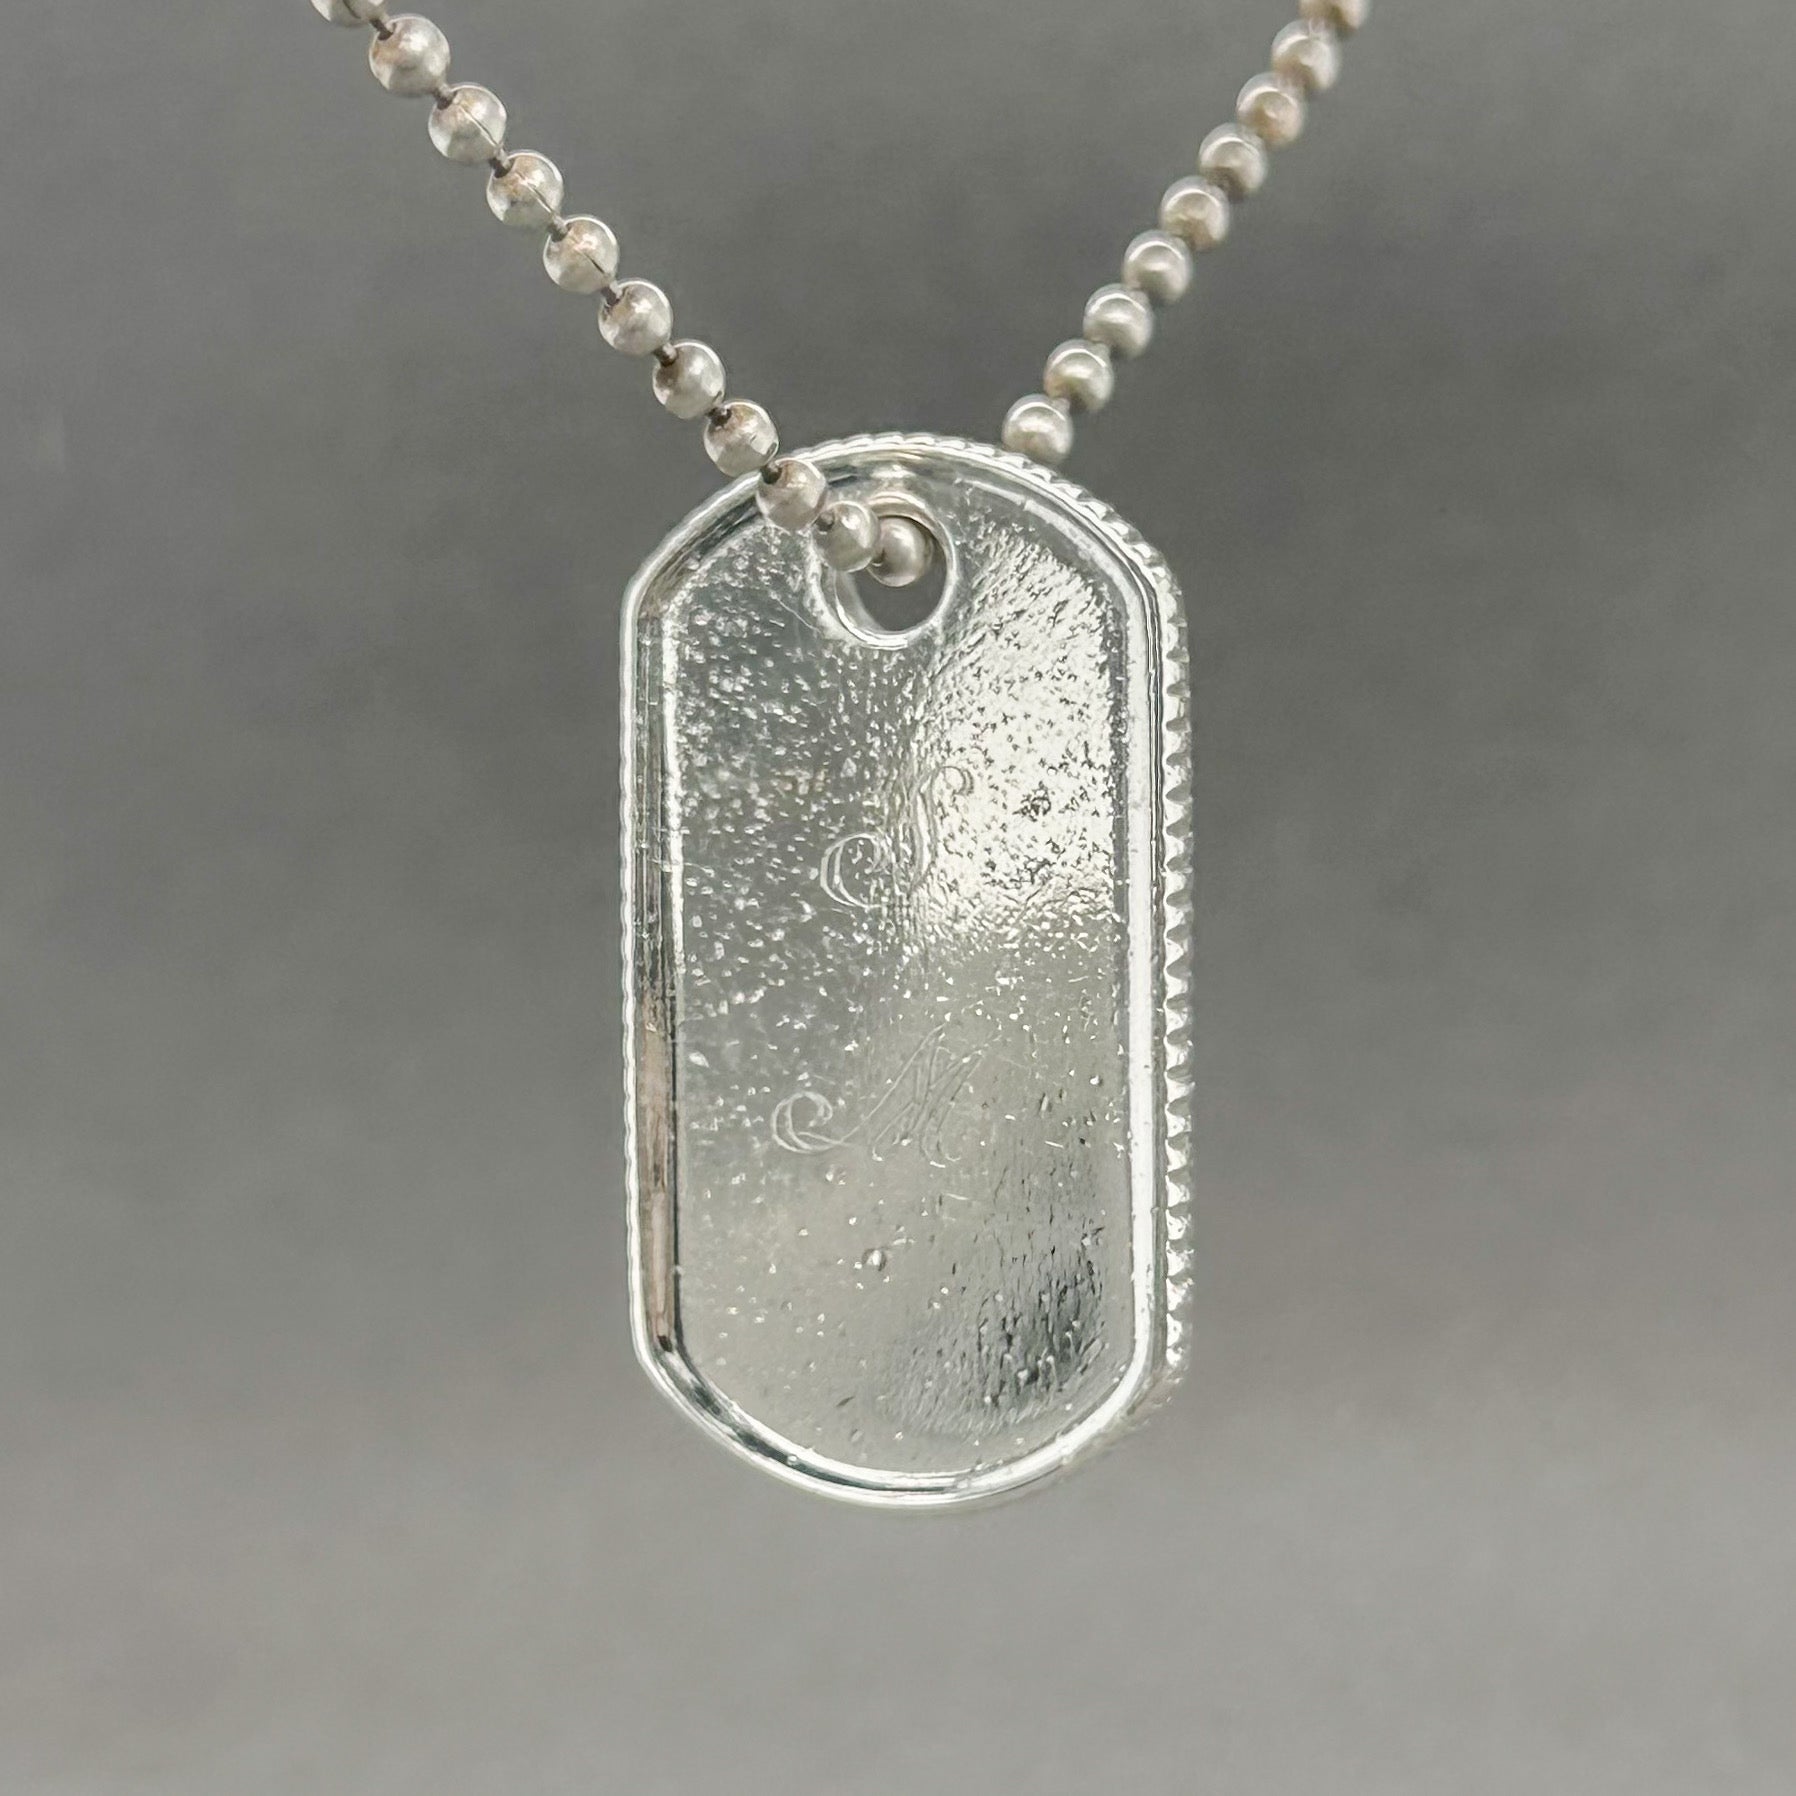 Necklace rectangular with round corners (US Army Style) dog tag